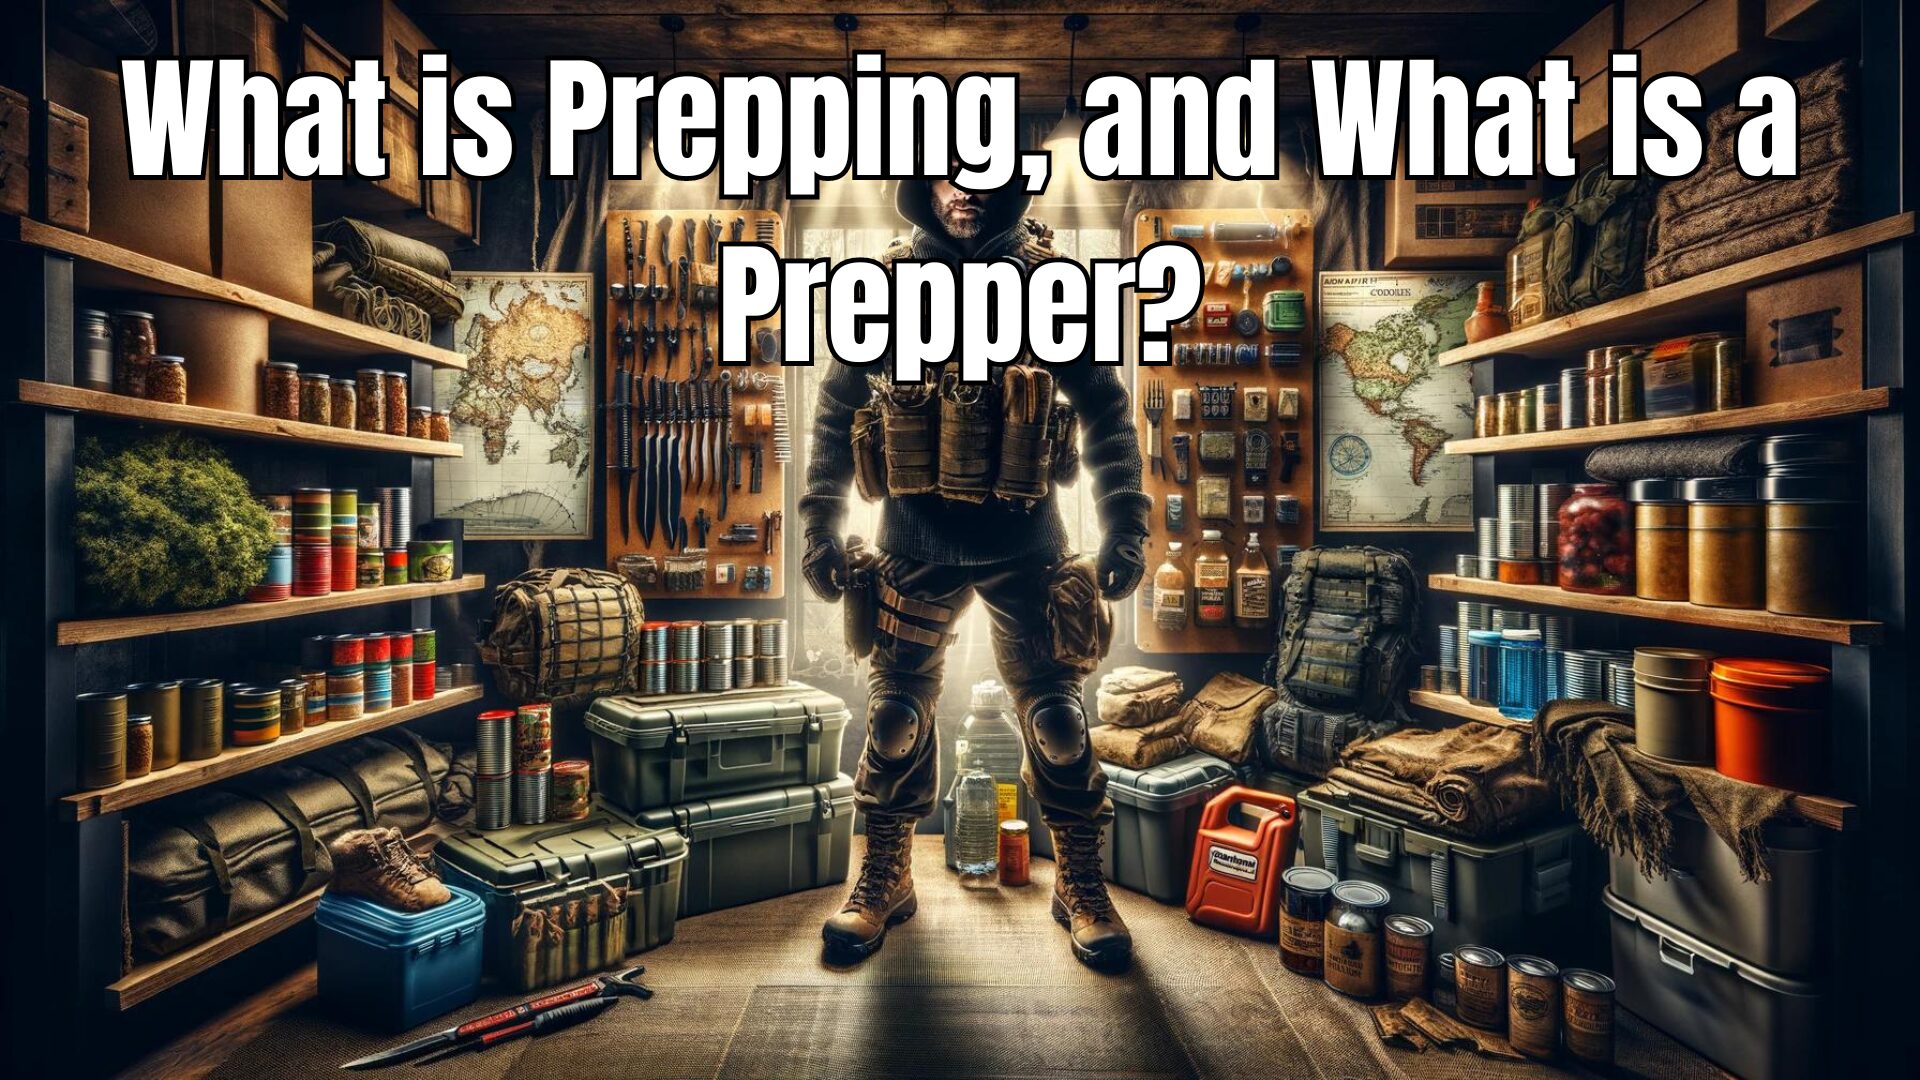 What is Prepping, and What is a Prepper?